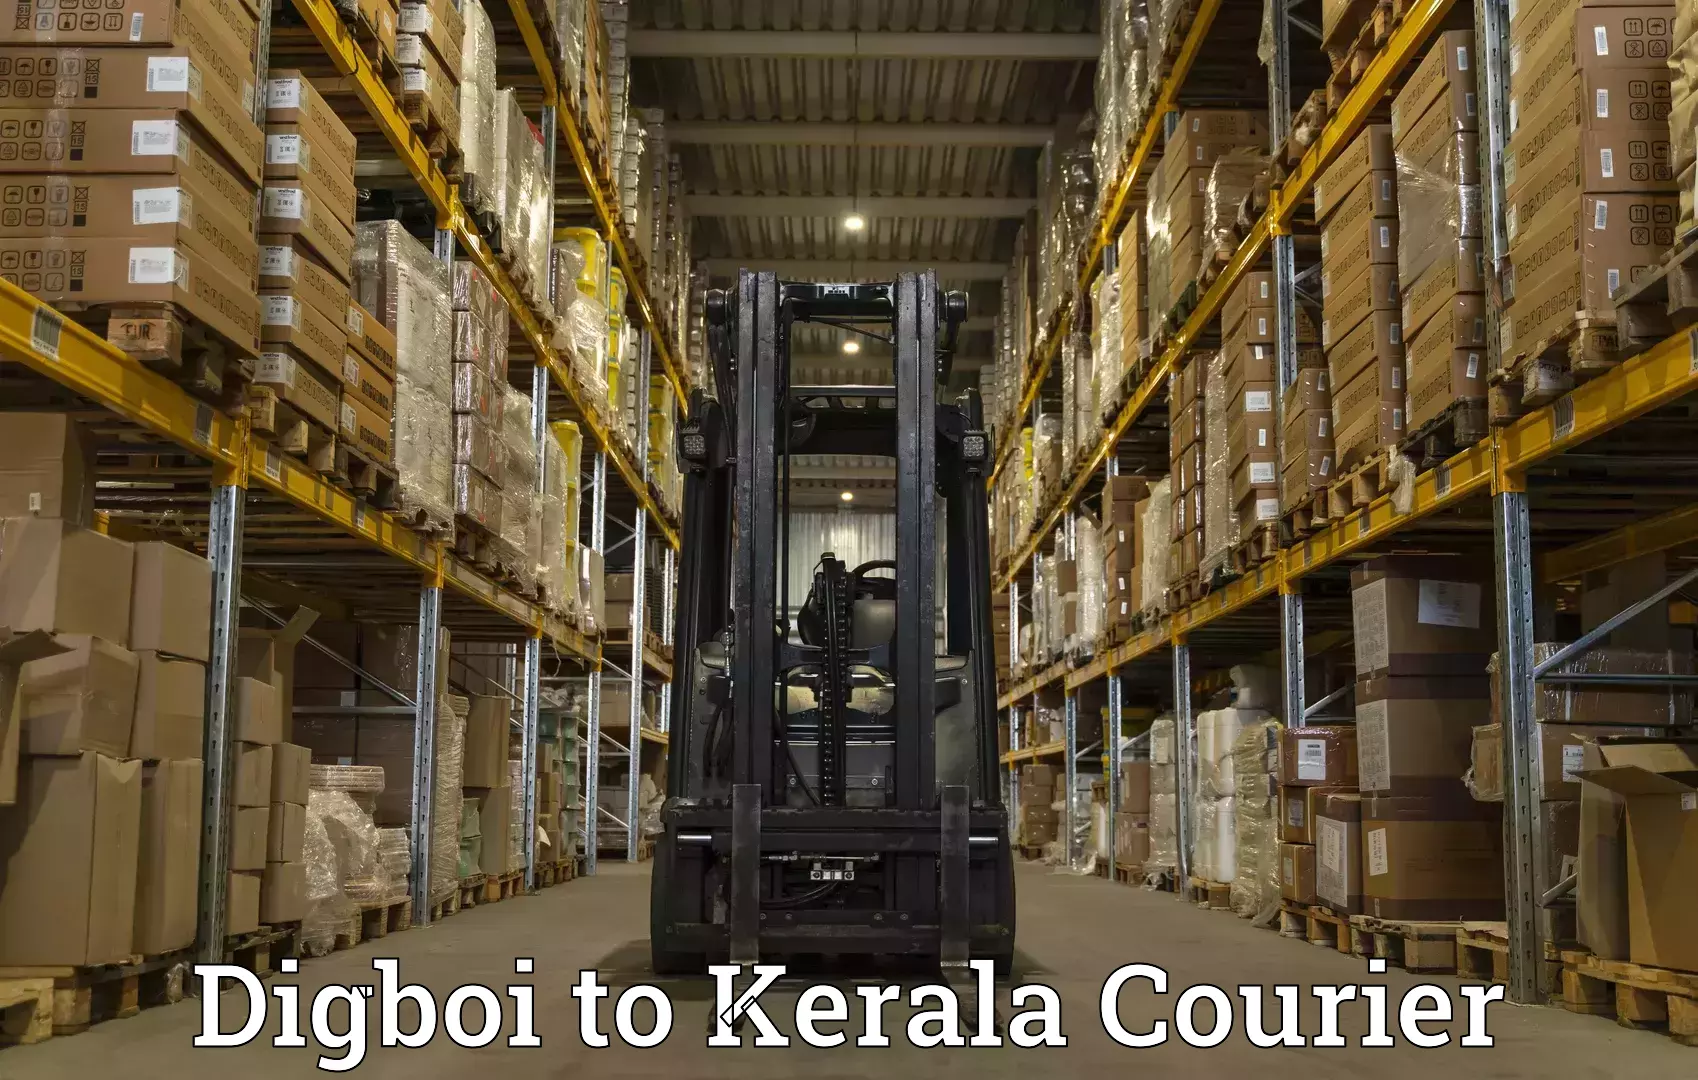 Package tracking in Digboi to Cochin Port Kochi